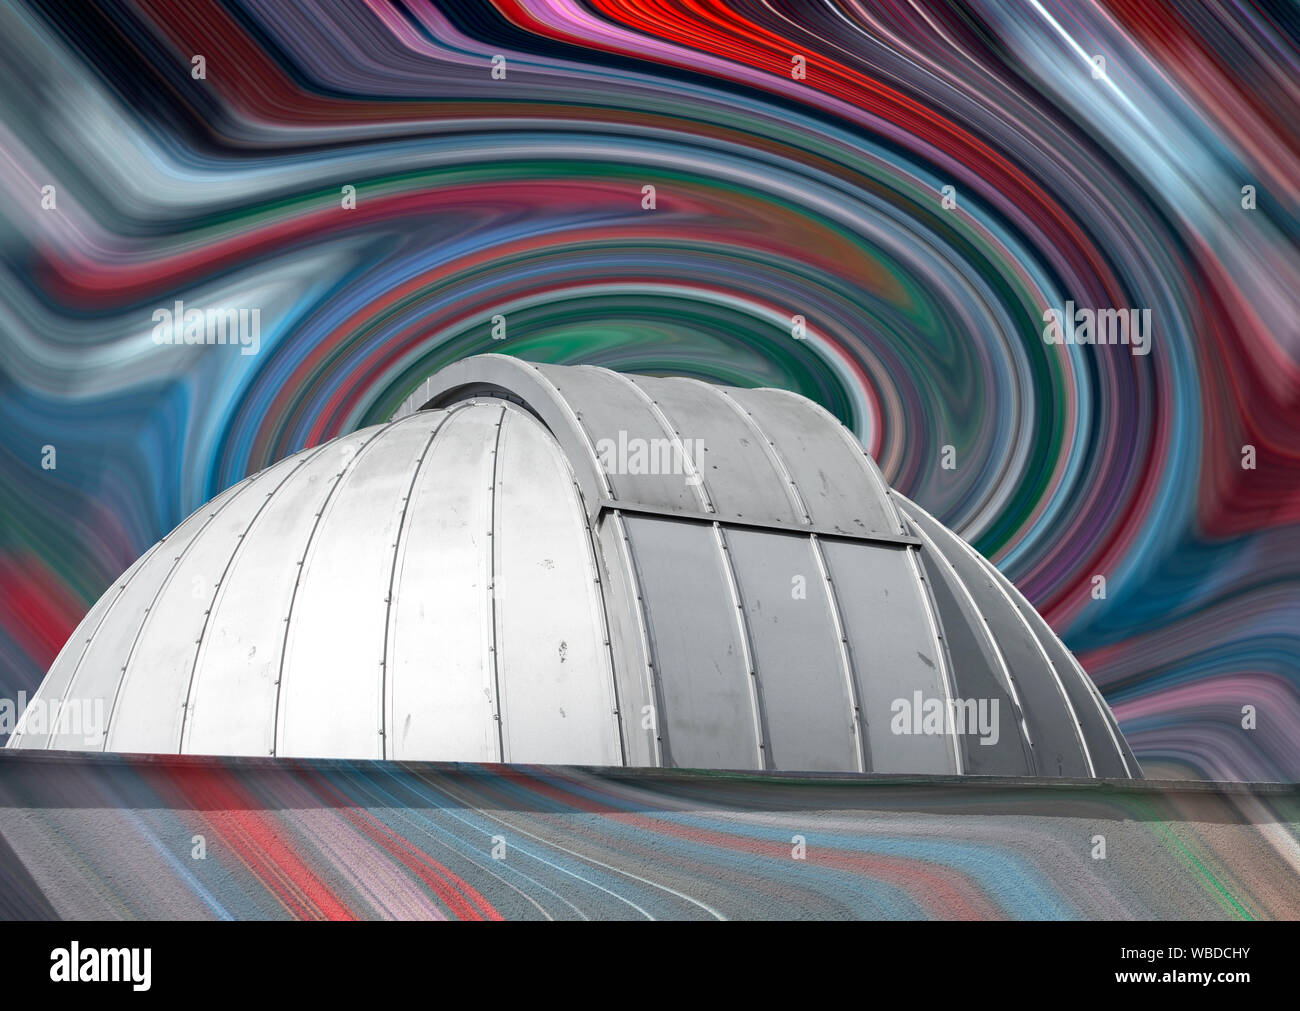 Either for astrology or astronomy: A classical observatory dome under fantastic time-space wrap sky. Stock Photo